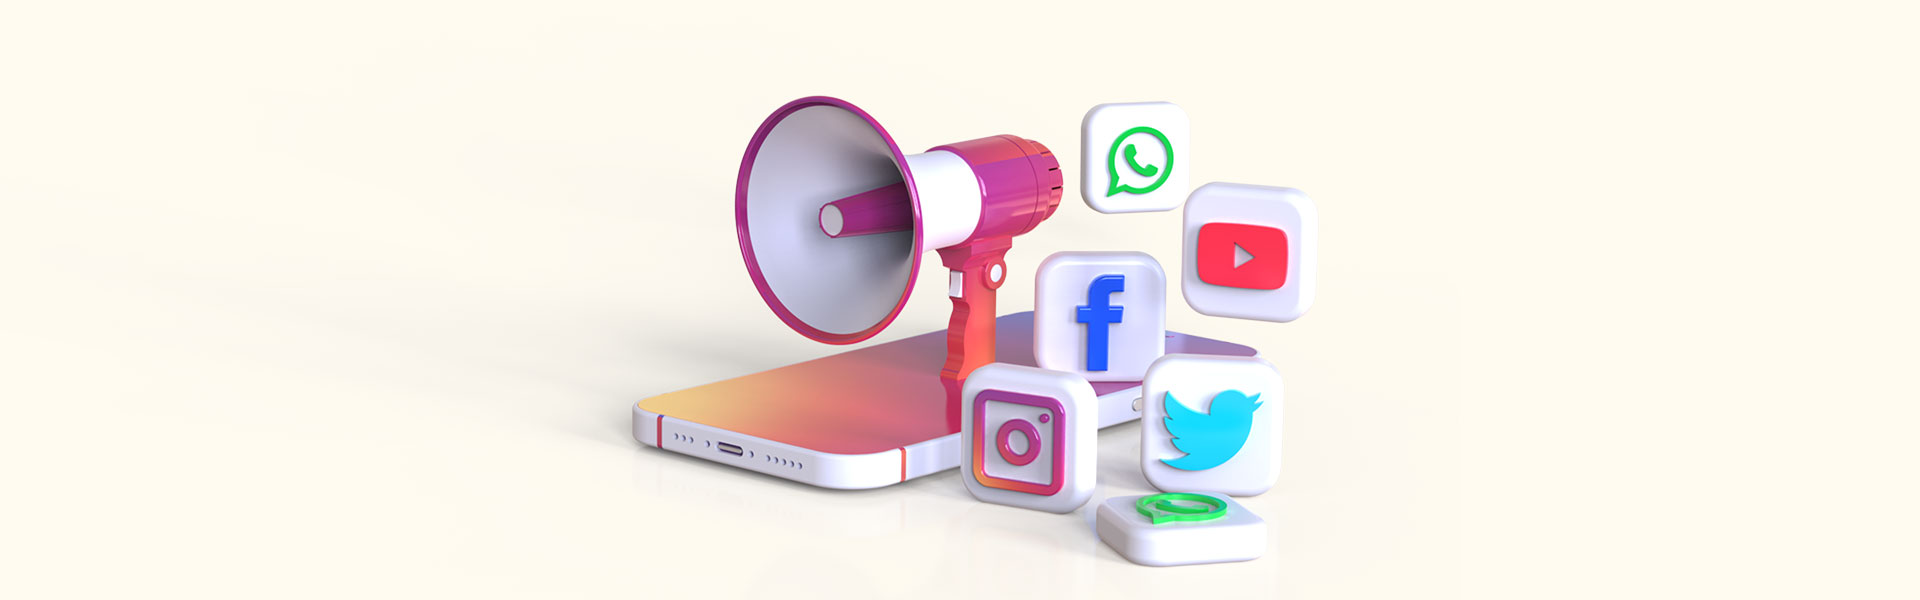 How to use social media to market your brand